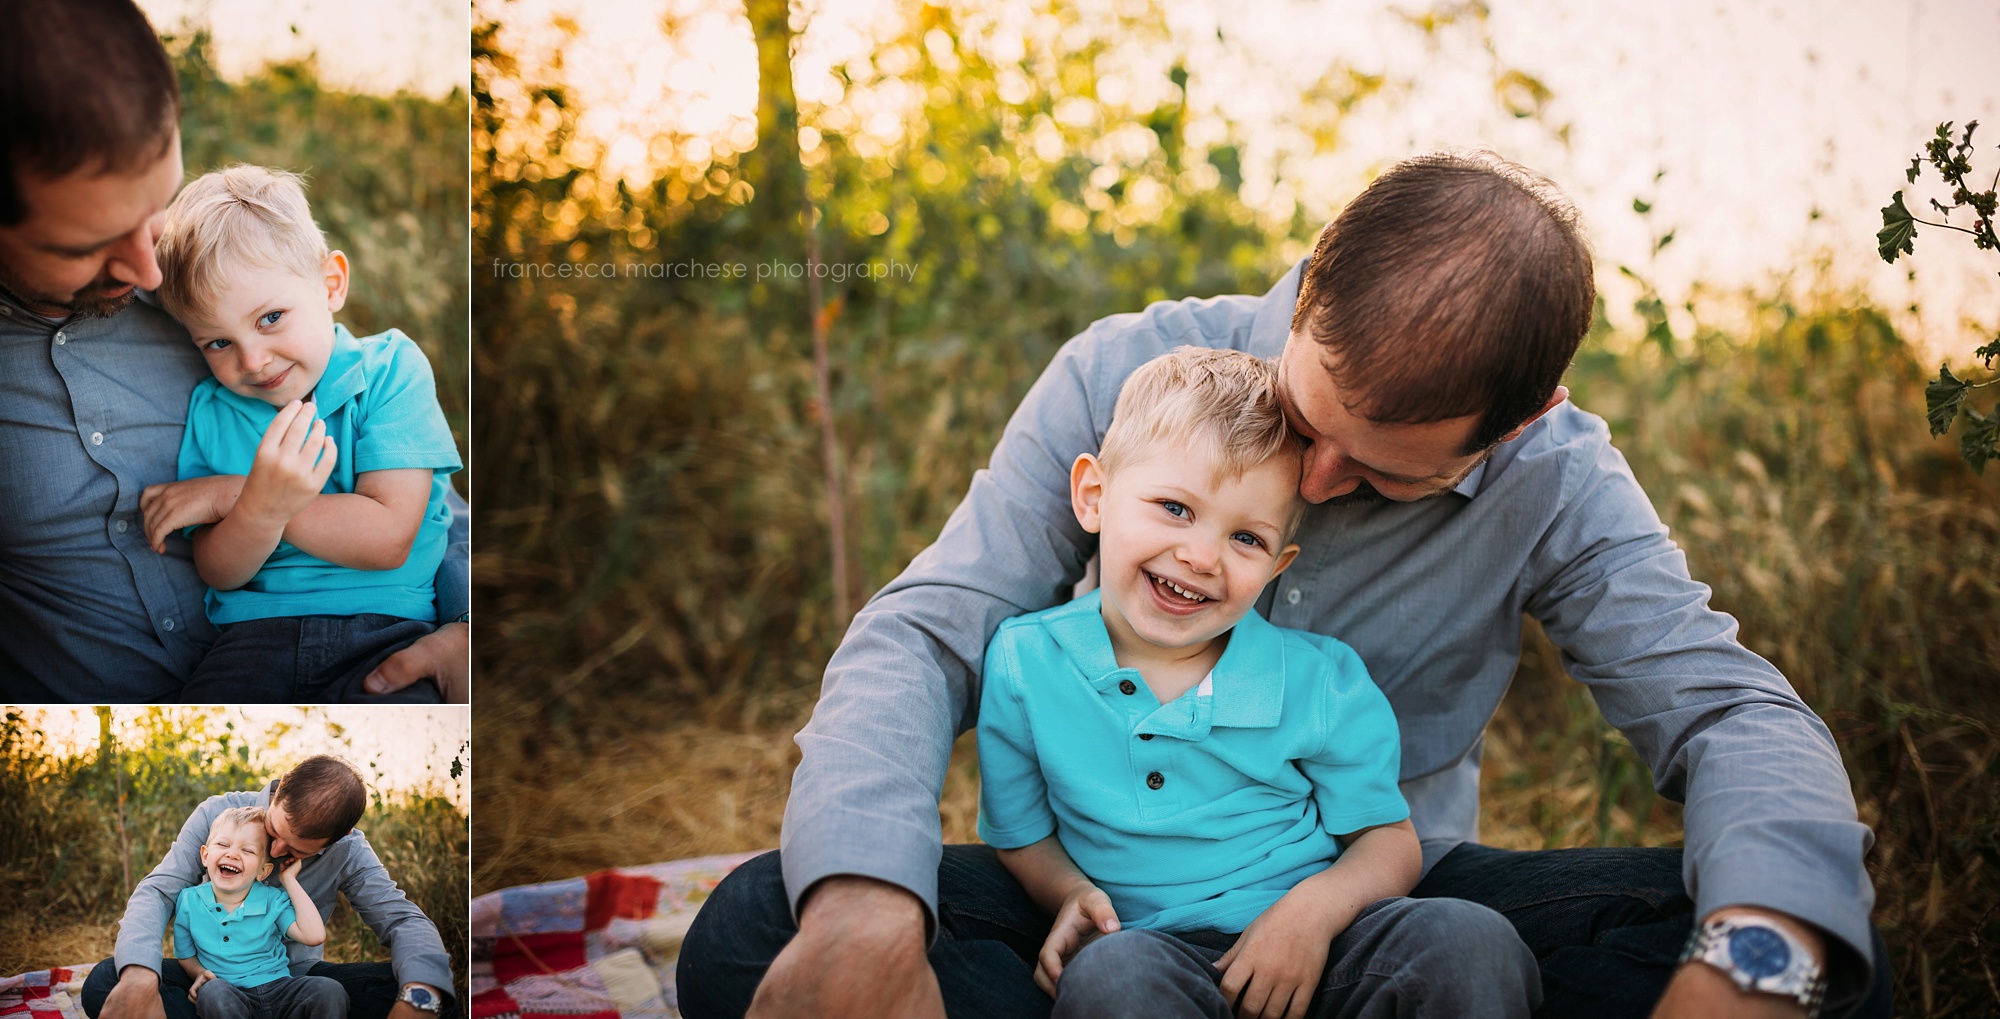 Francesca Marchese Photography father and young son family photography session in orange county